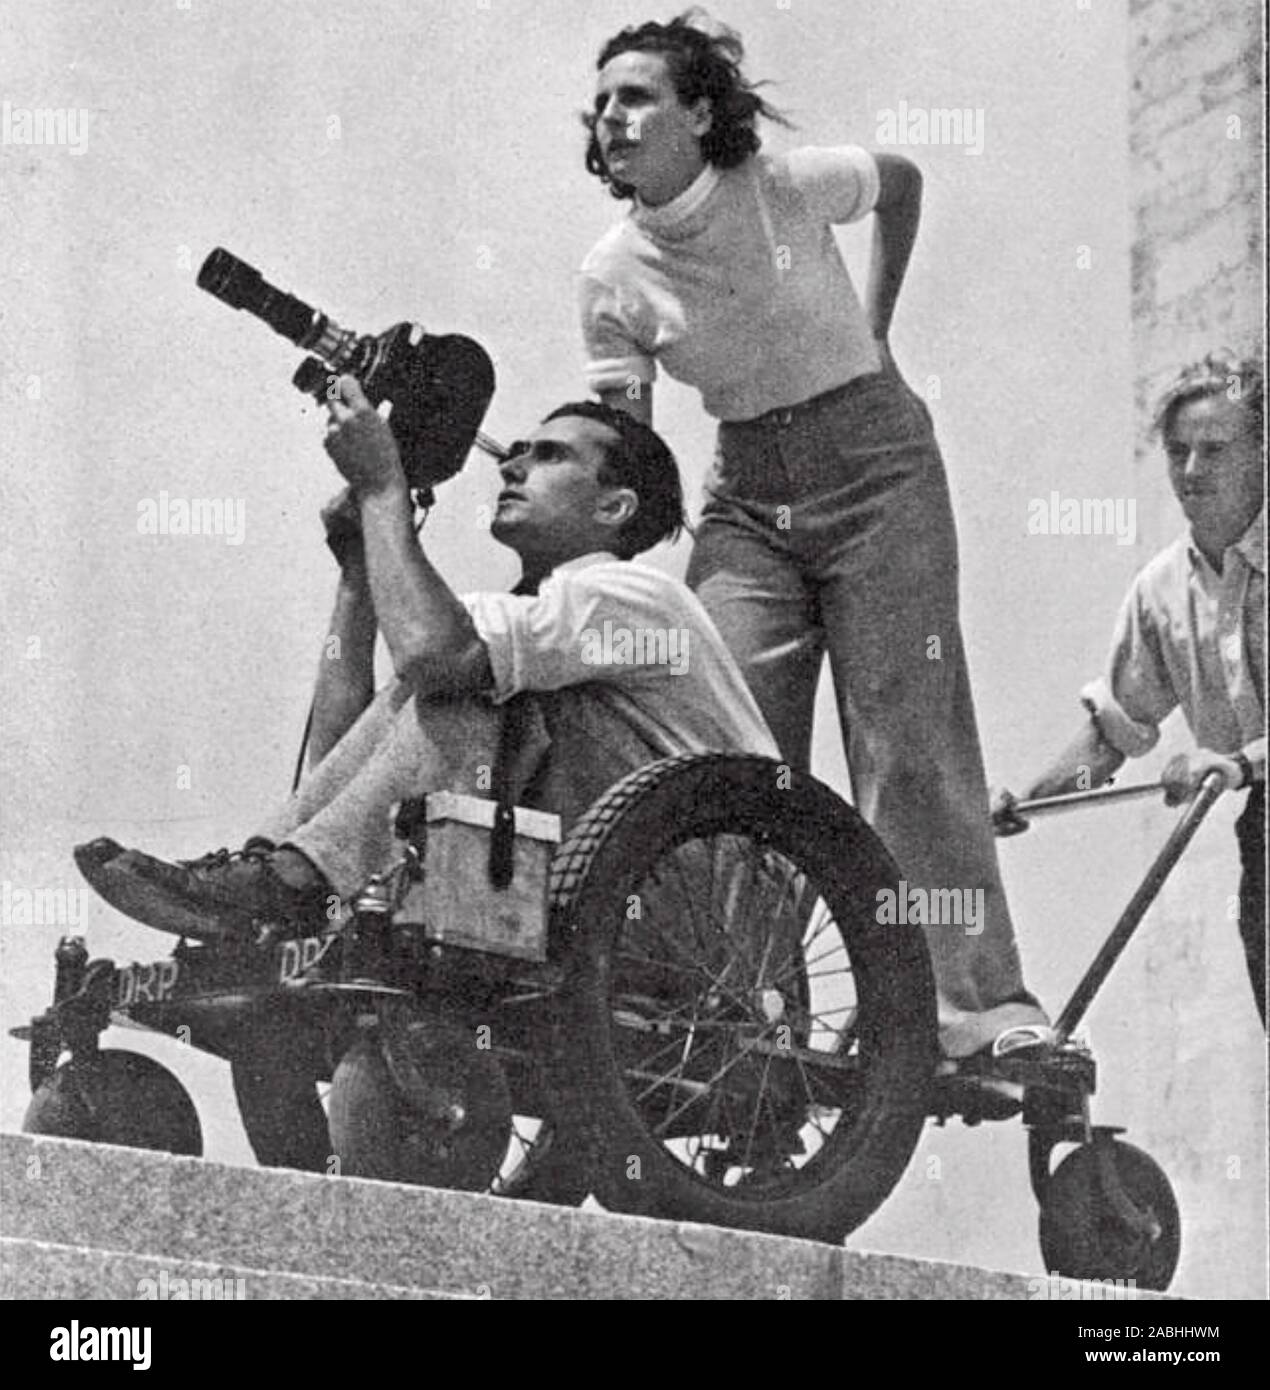 LENI RIEFENSTAHL (1902-2003) German film director supervising coverage of the 1936 Berlin Summer  Olympics for the film 'Olympia' Stock Photo